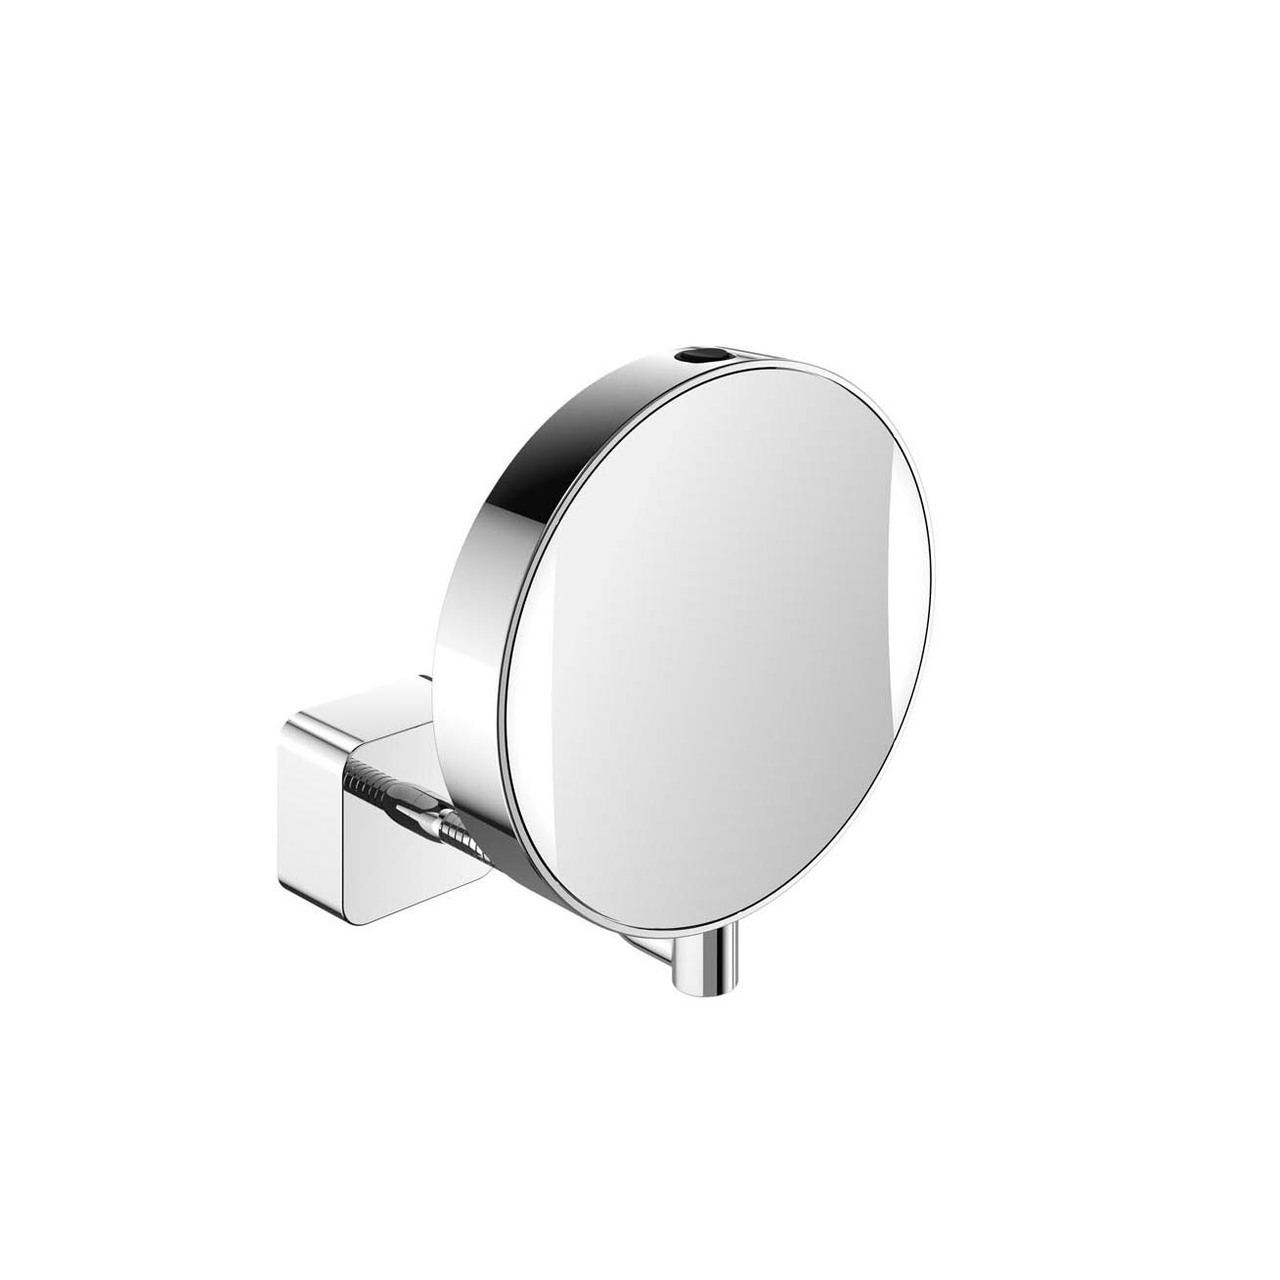 Imago Flexible LED Hard Wired Reversible Magnifying Mirror 7x/3x